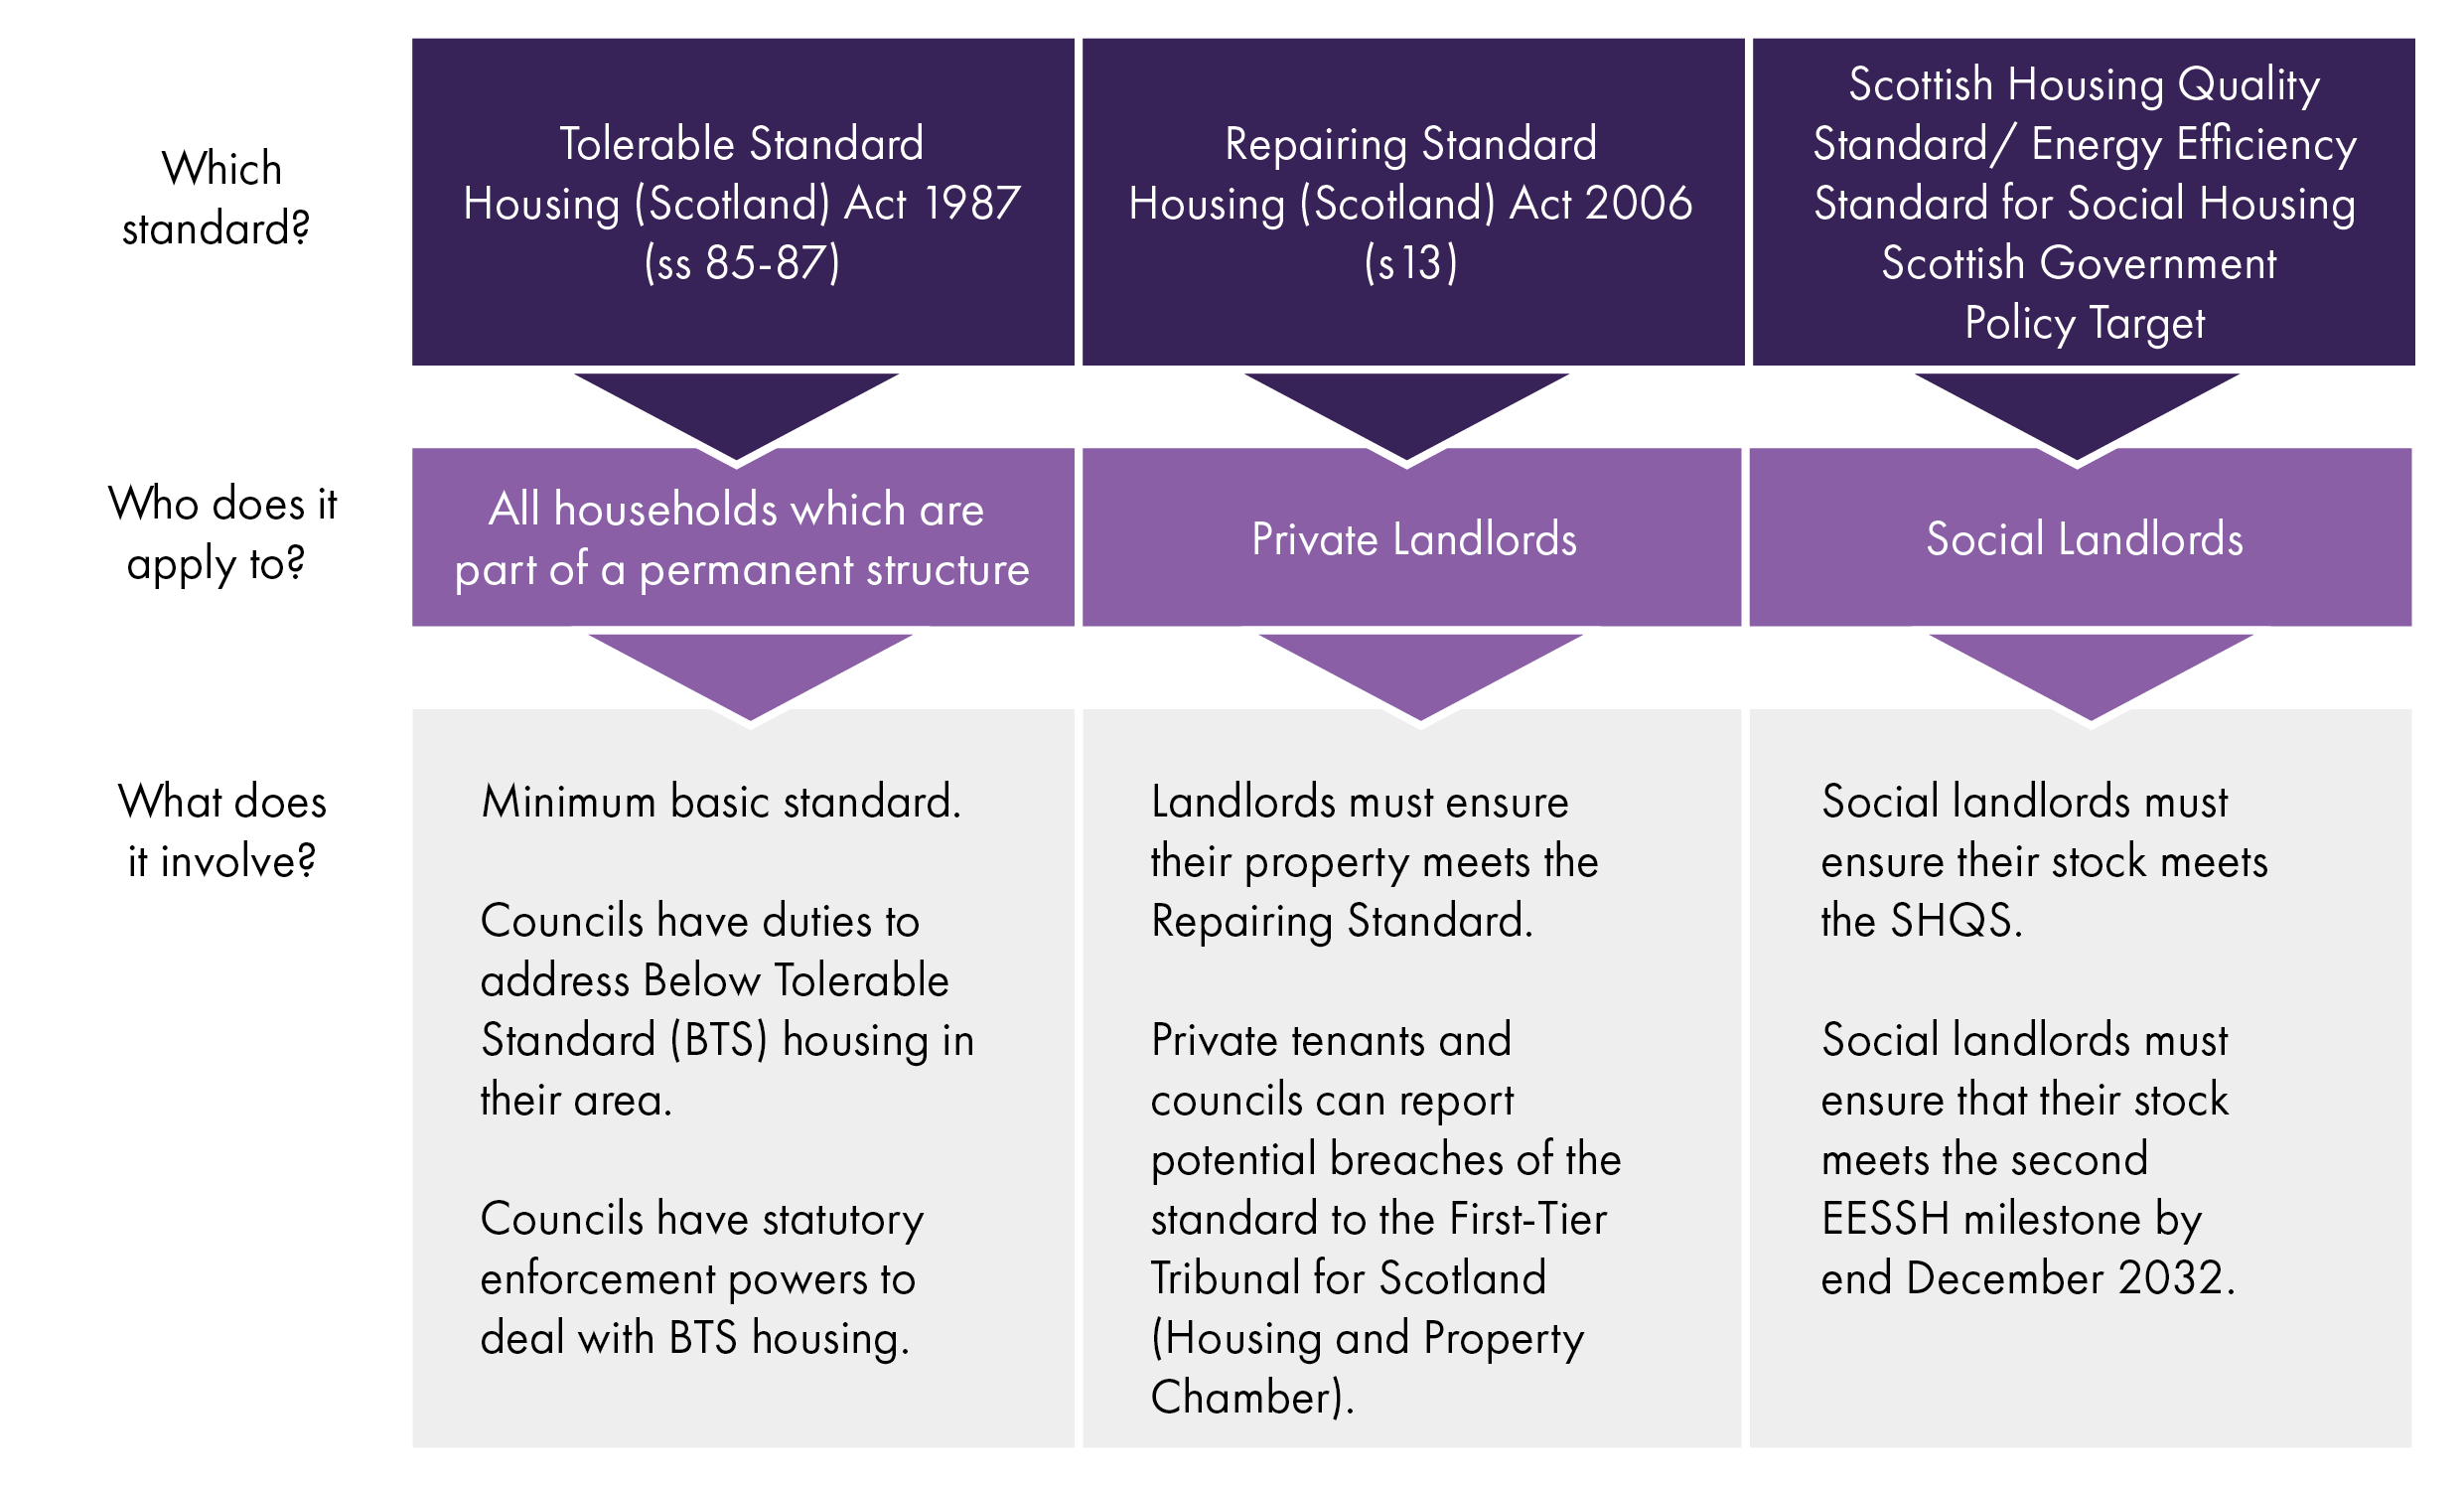 There are different housing standards in Scotland. The Tolerable Standard applies to homes in all tenures. The Repairing Standard applies to private rented homes. The Scottish Housing Quality Standard and the Energy Efficiency Standard for Social Housing applies to social housing.